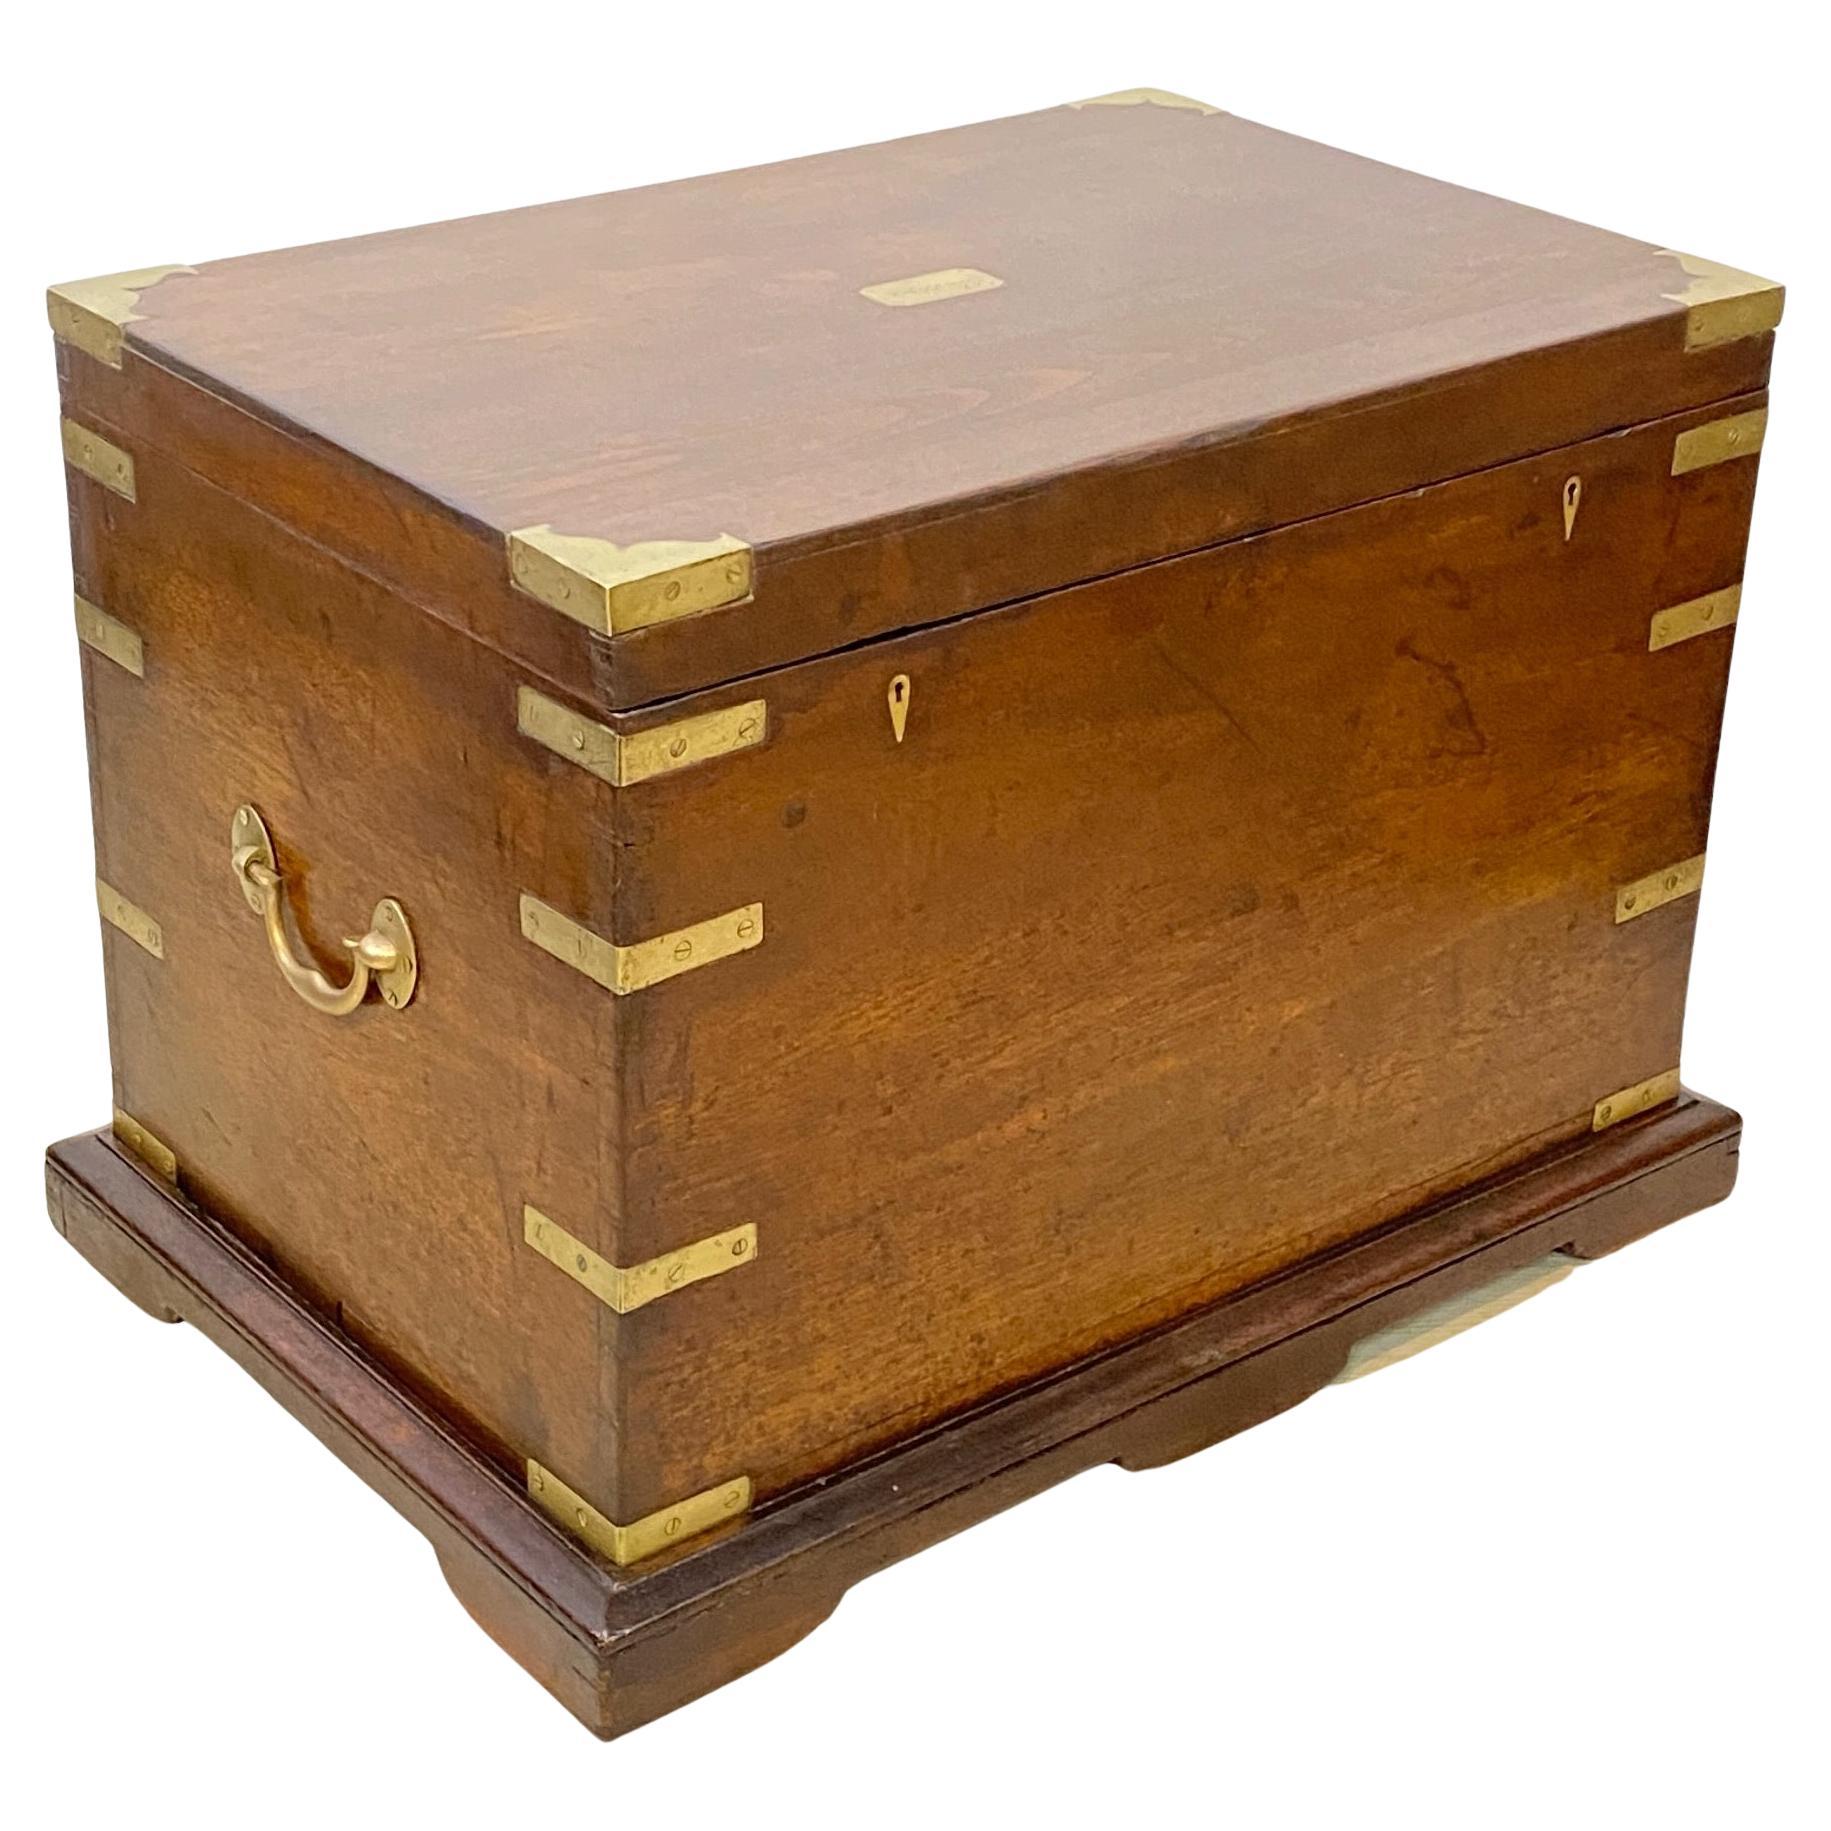 19th Century Chinese Export Mahogany and Brass Chest Trunk / End Table